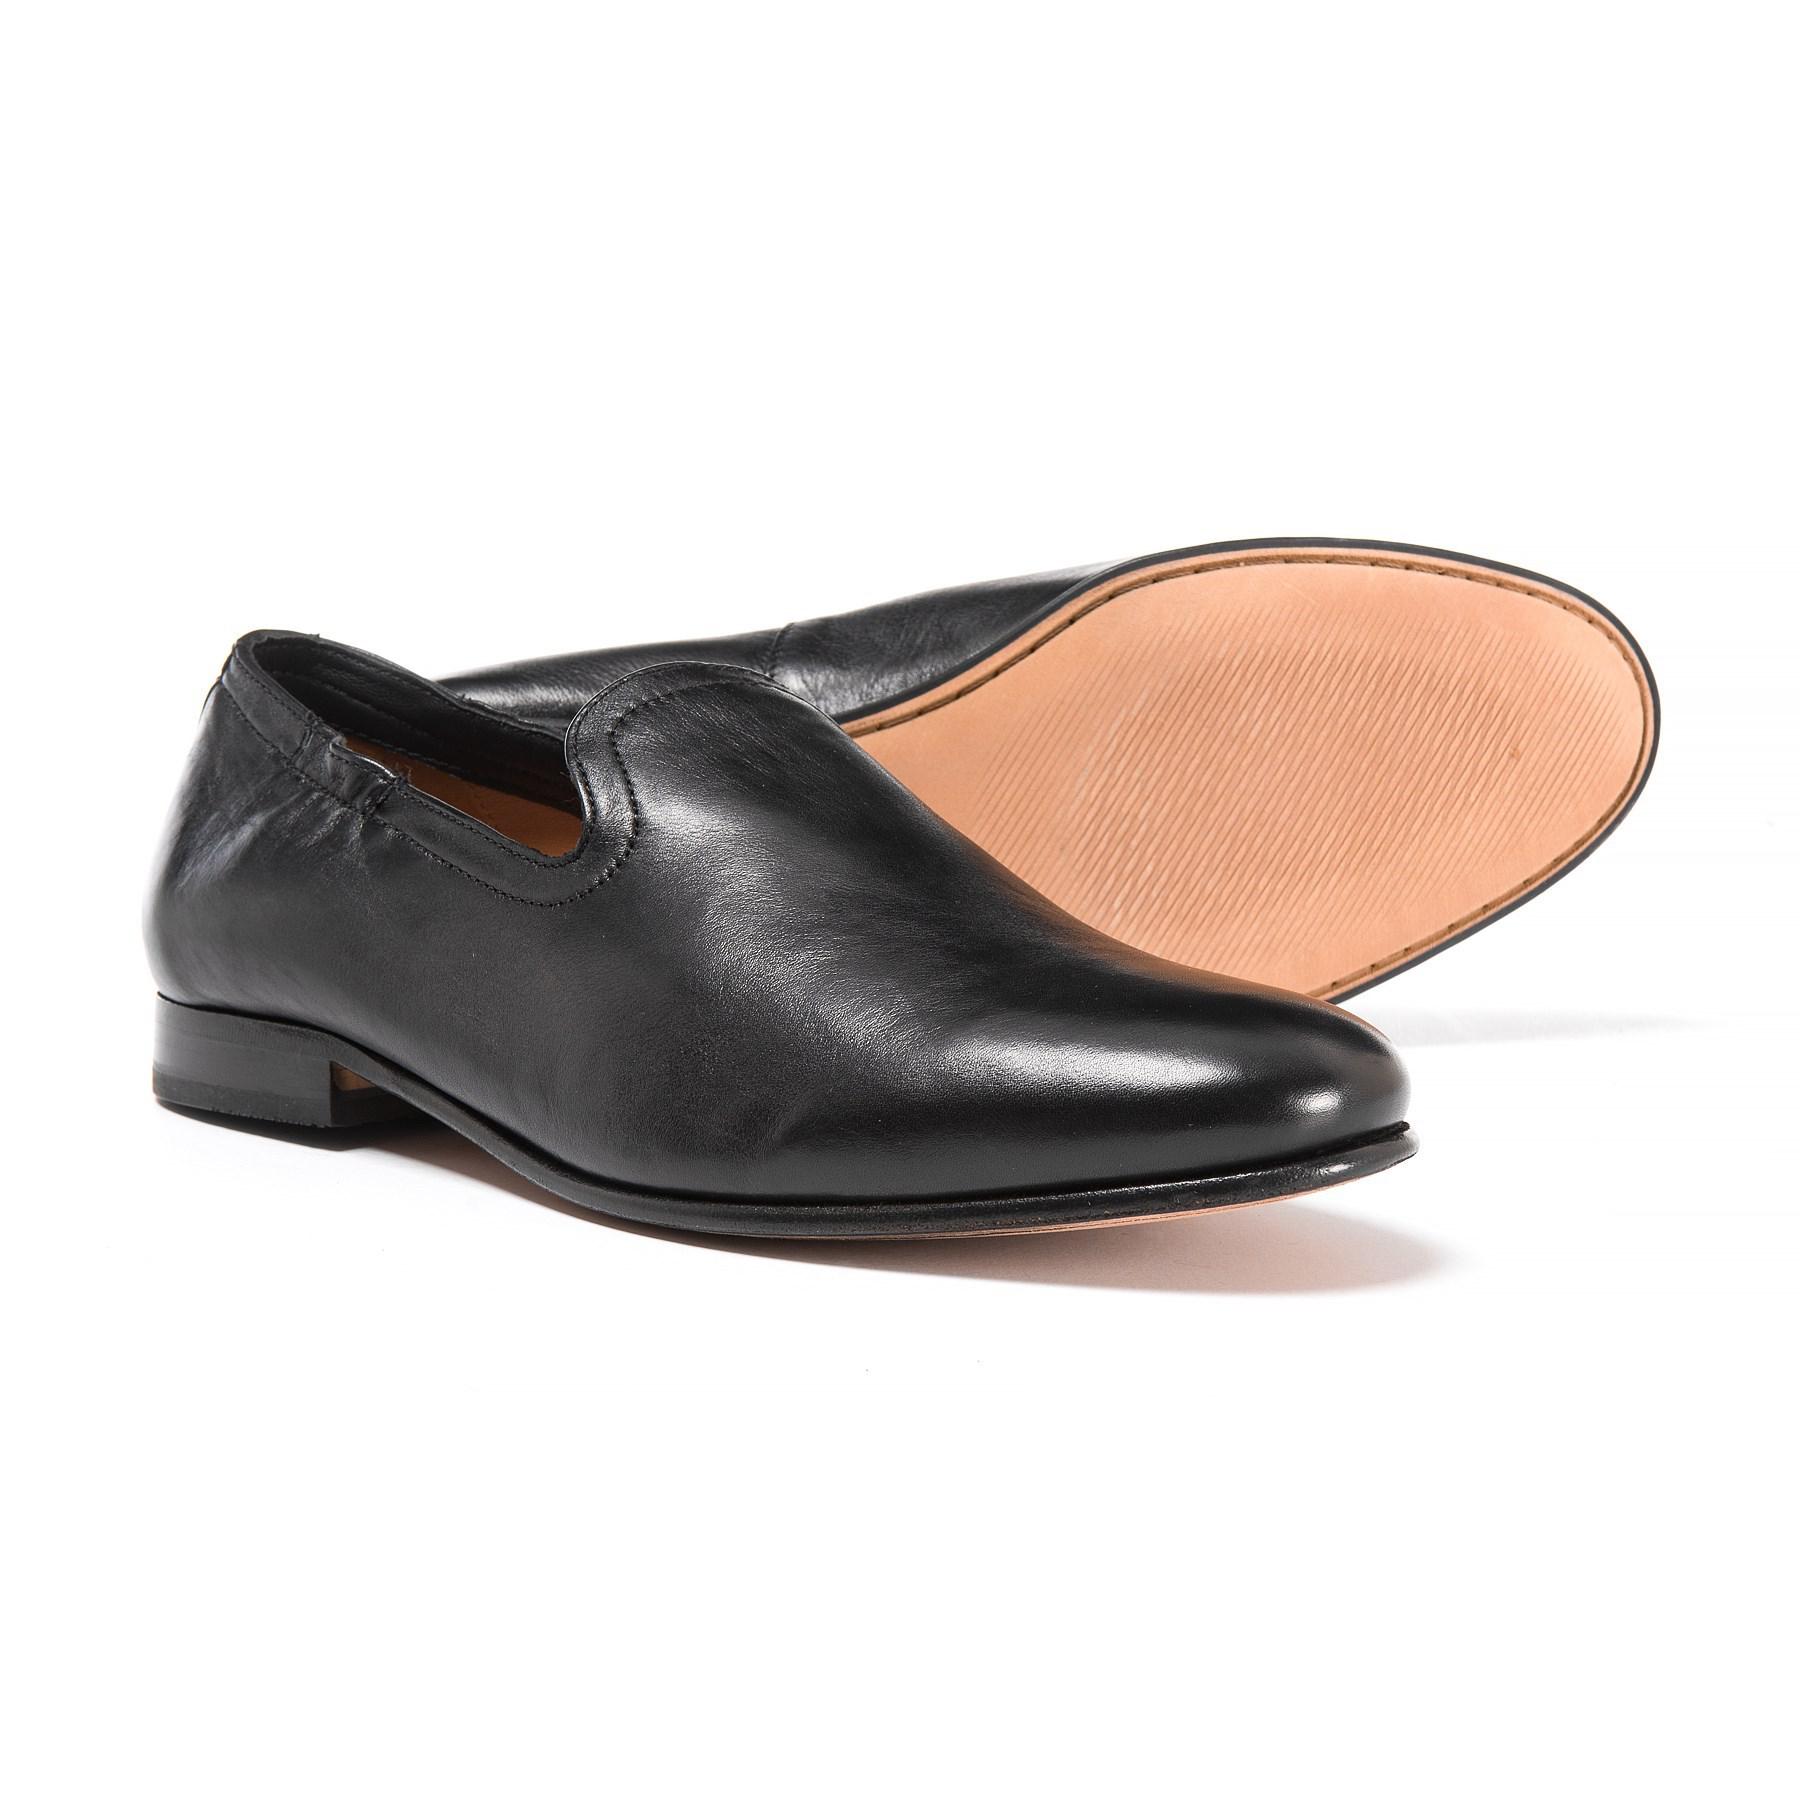 Clarks Leather Form Step Shoes in Black 